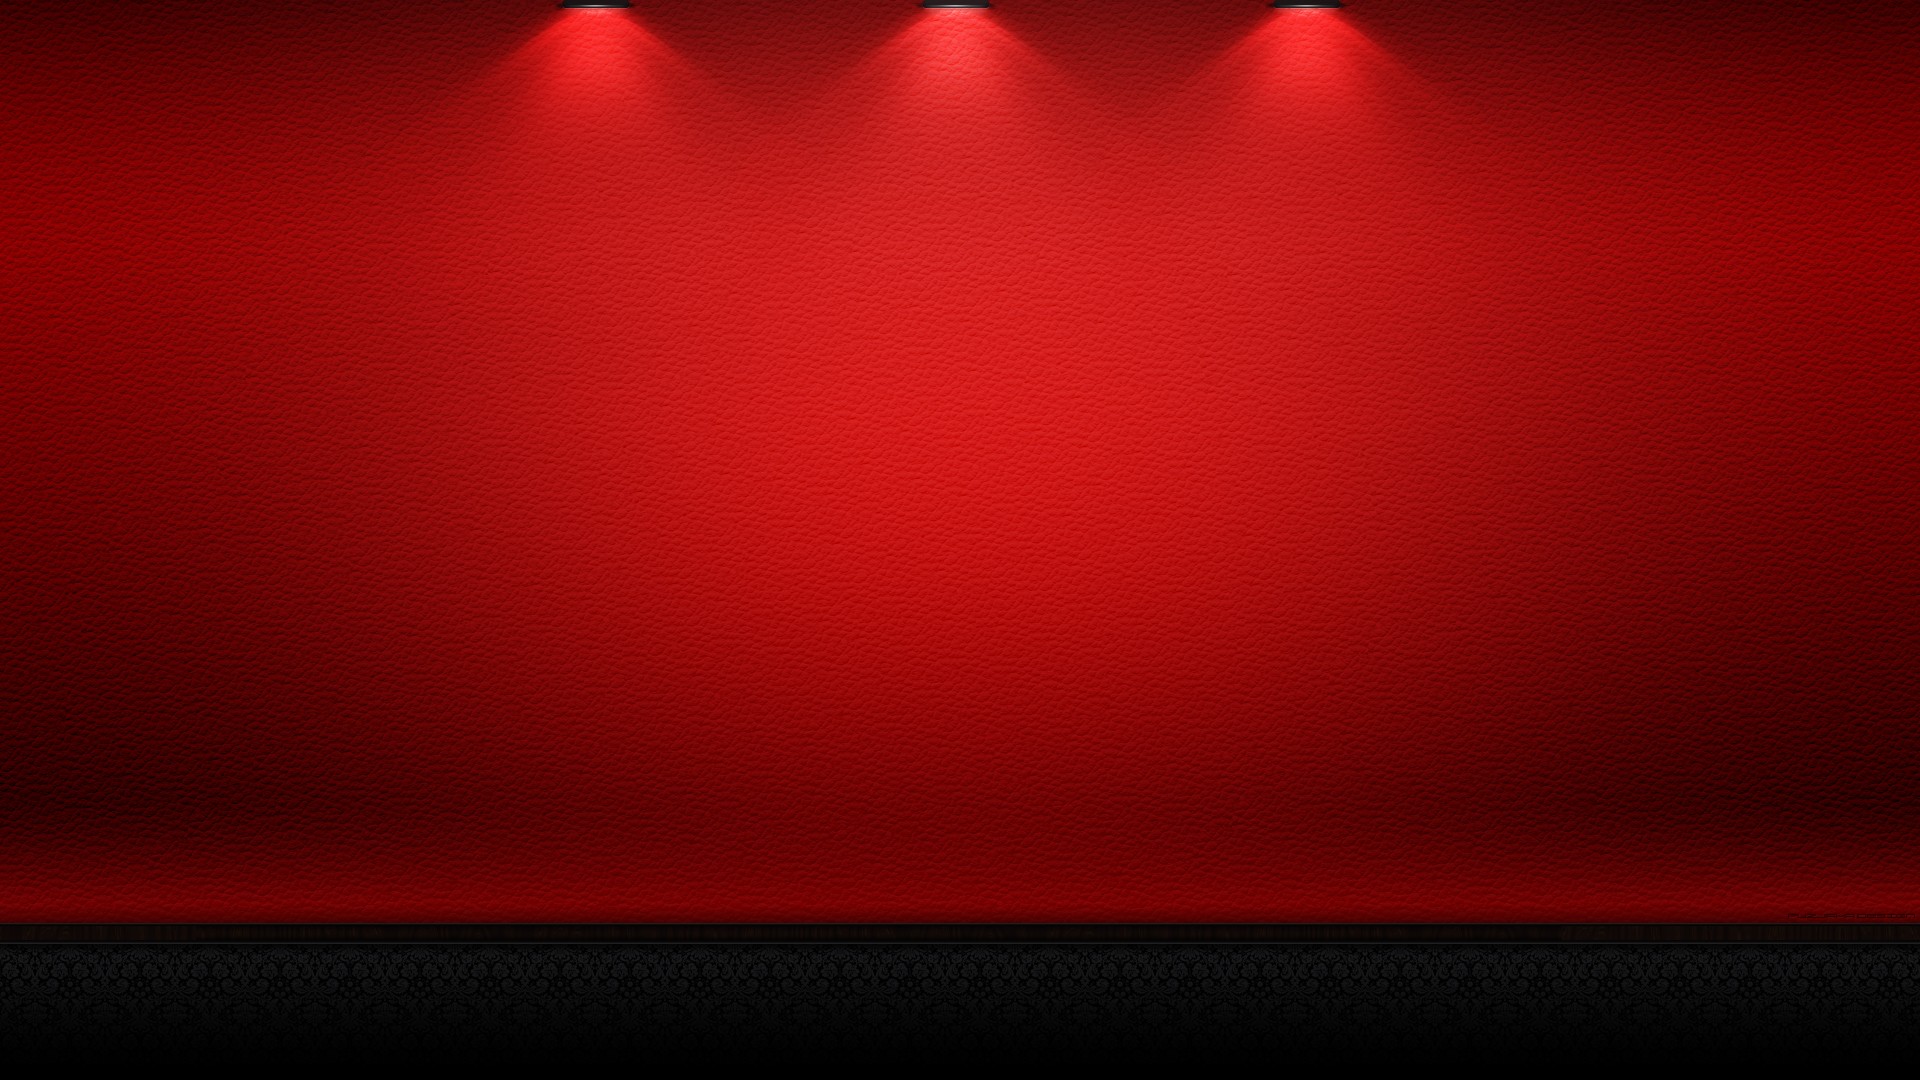 Red HD Wallpaper | Background Image | 1920x1080 | ID ...